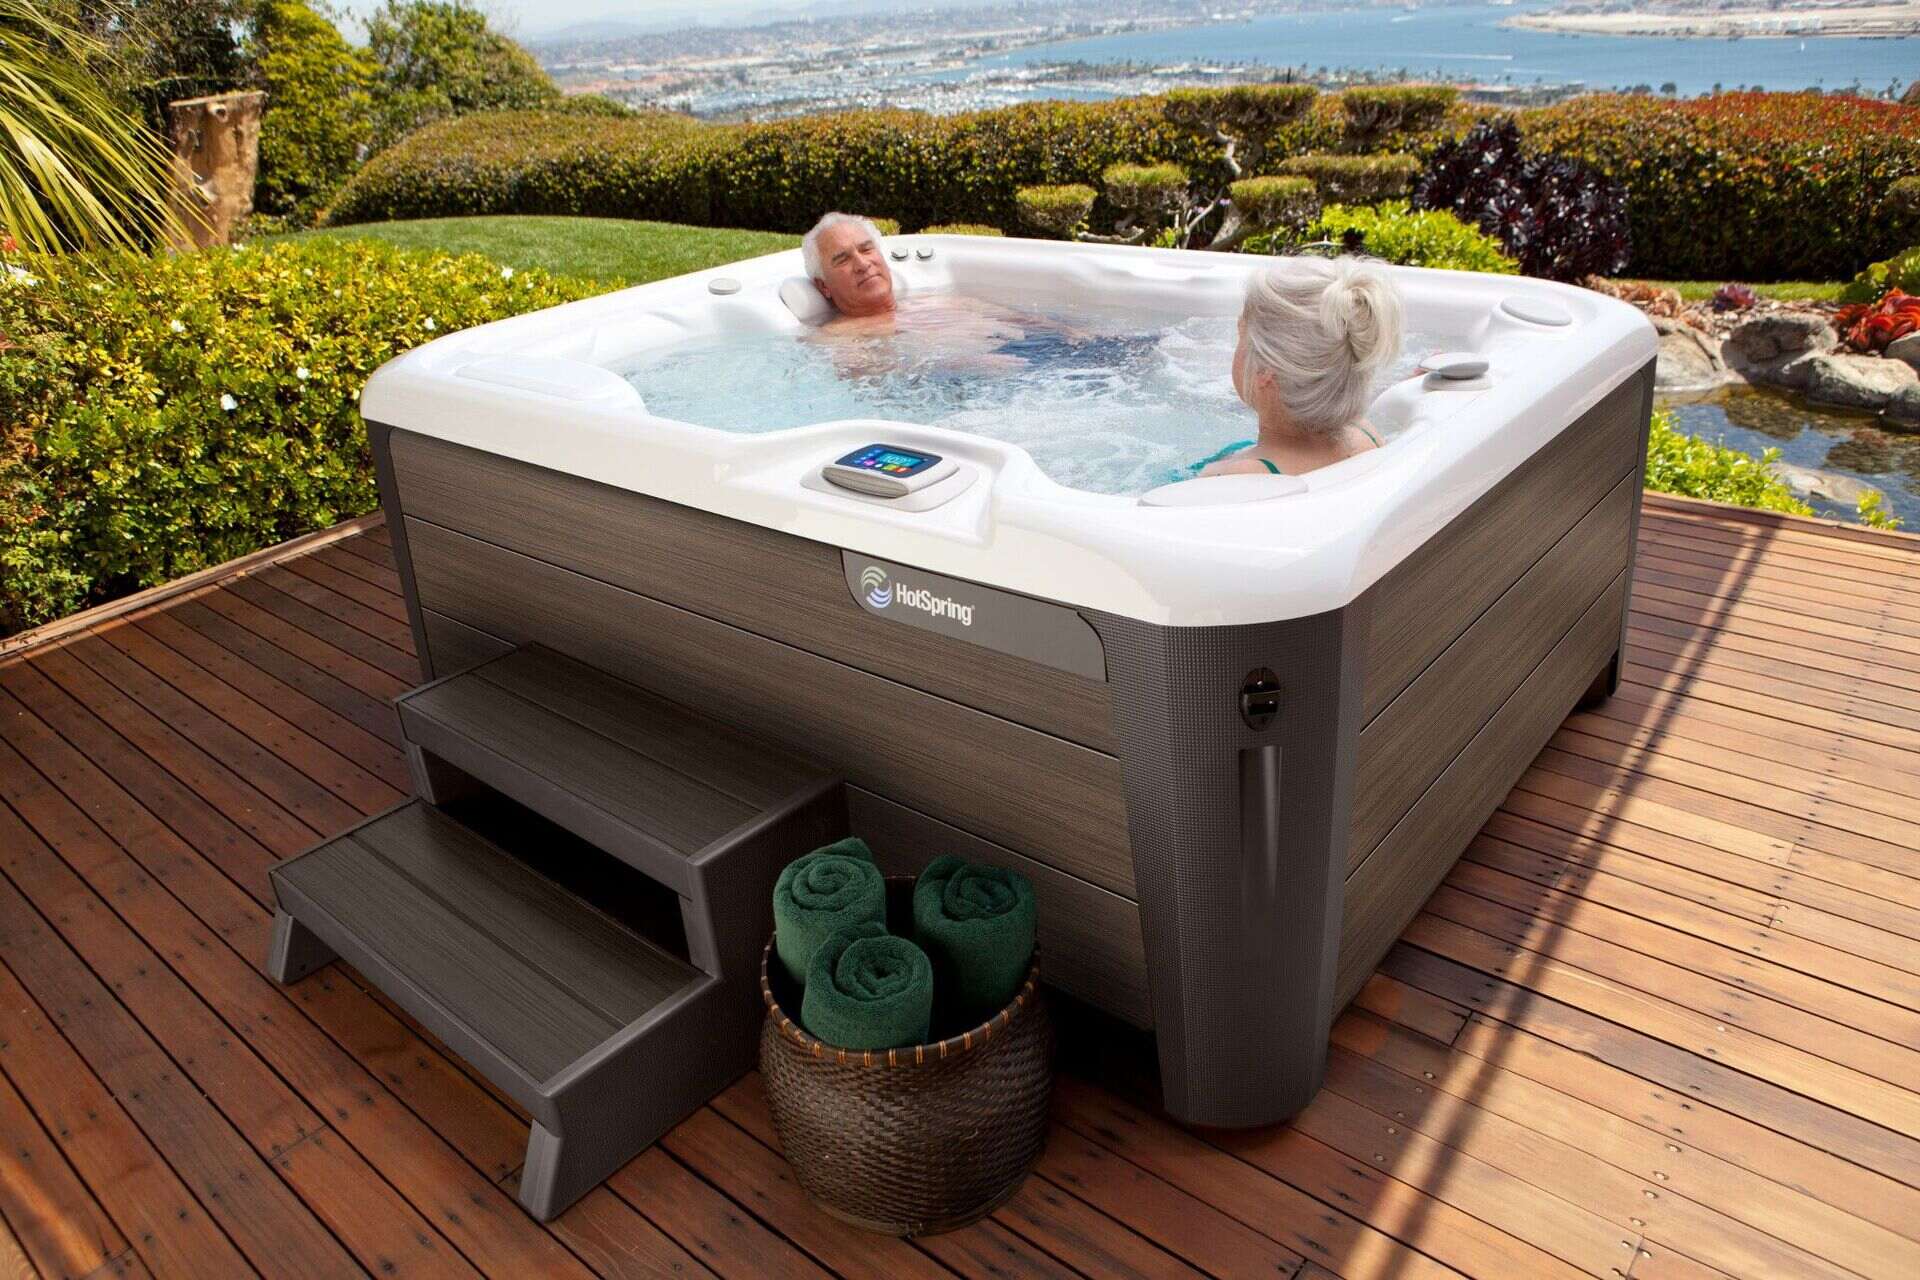 How To Turn On Hot Spring Hot Tub